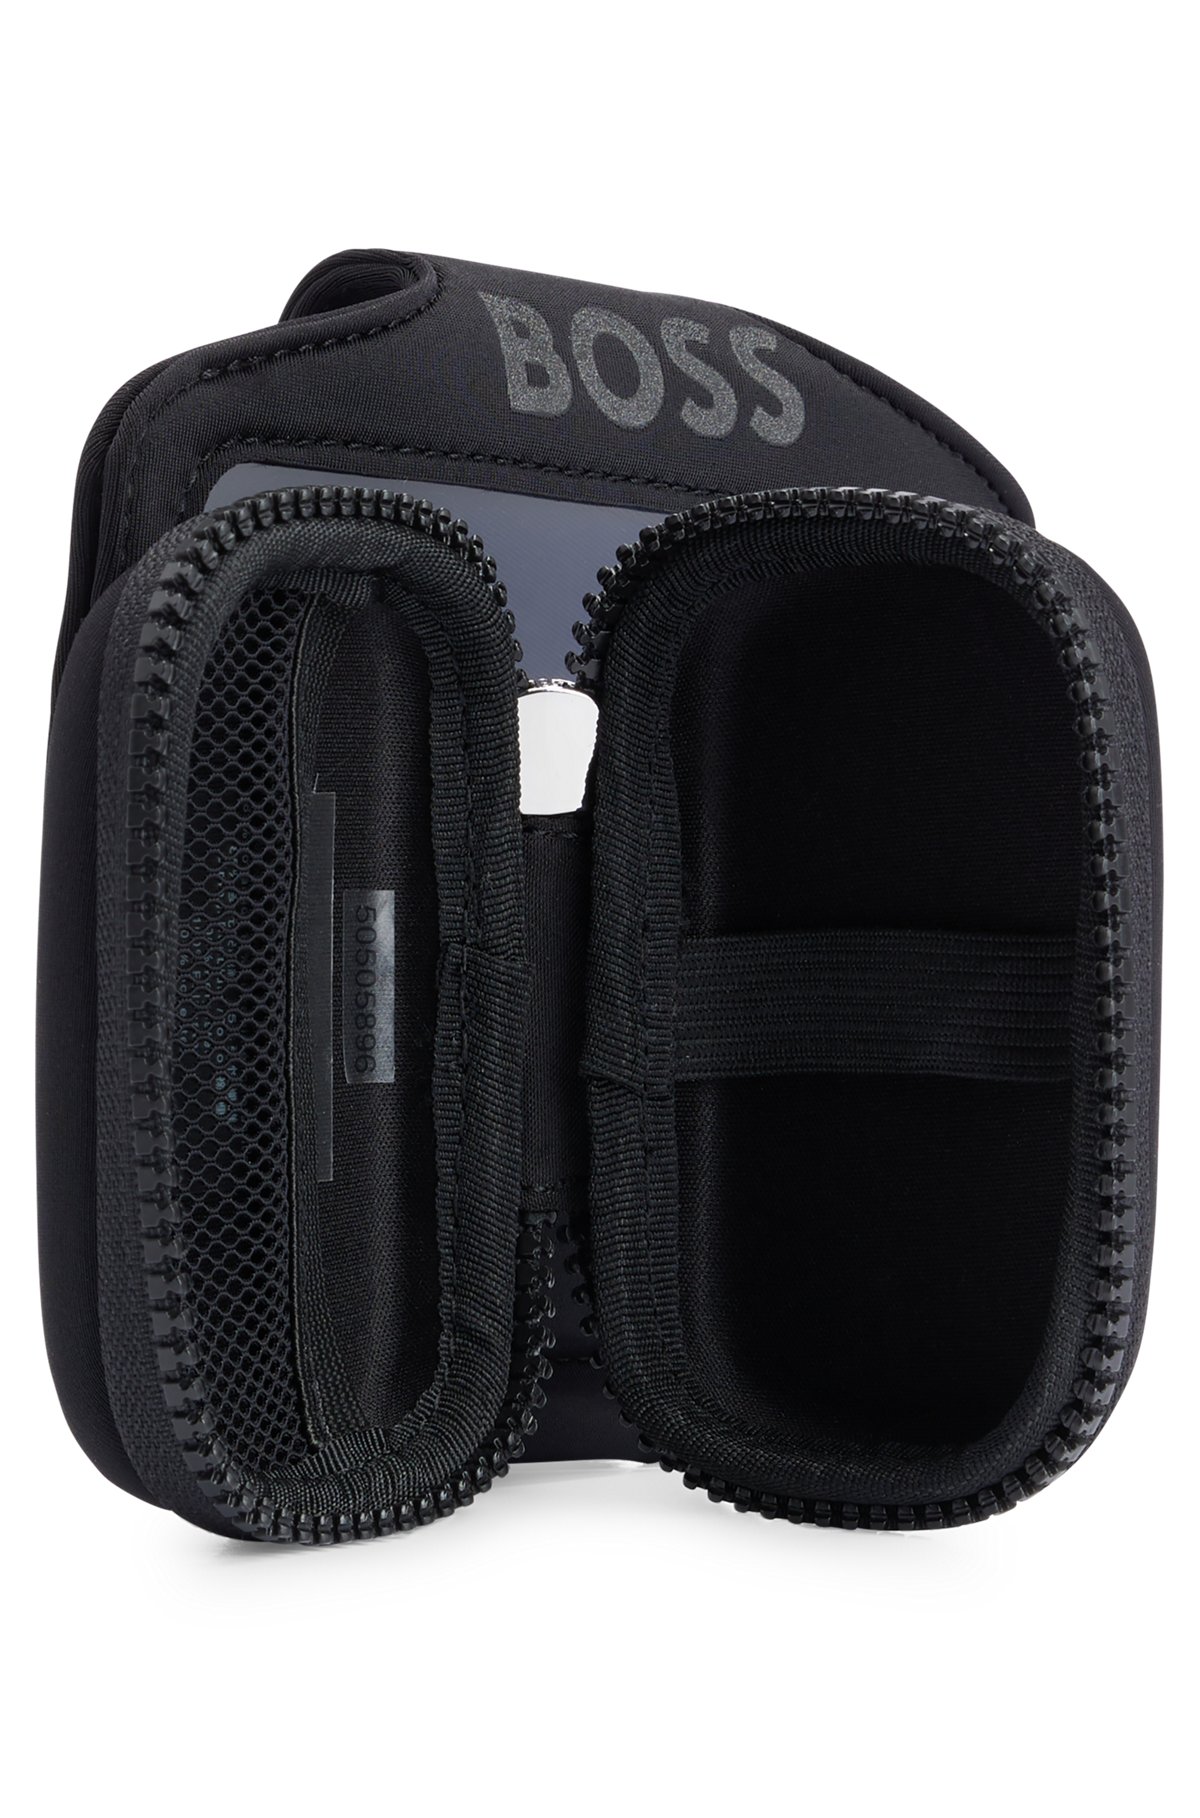 Gift-boxed running set with phone holder and pouch, Black